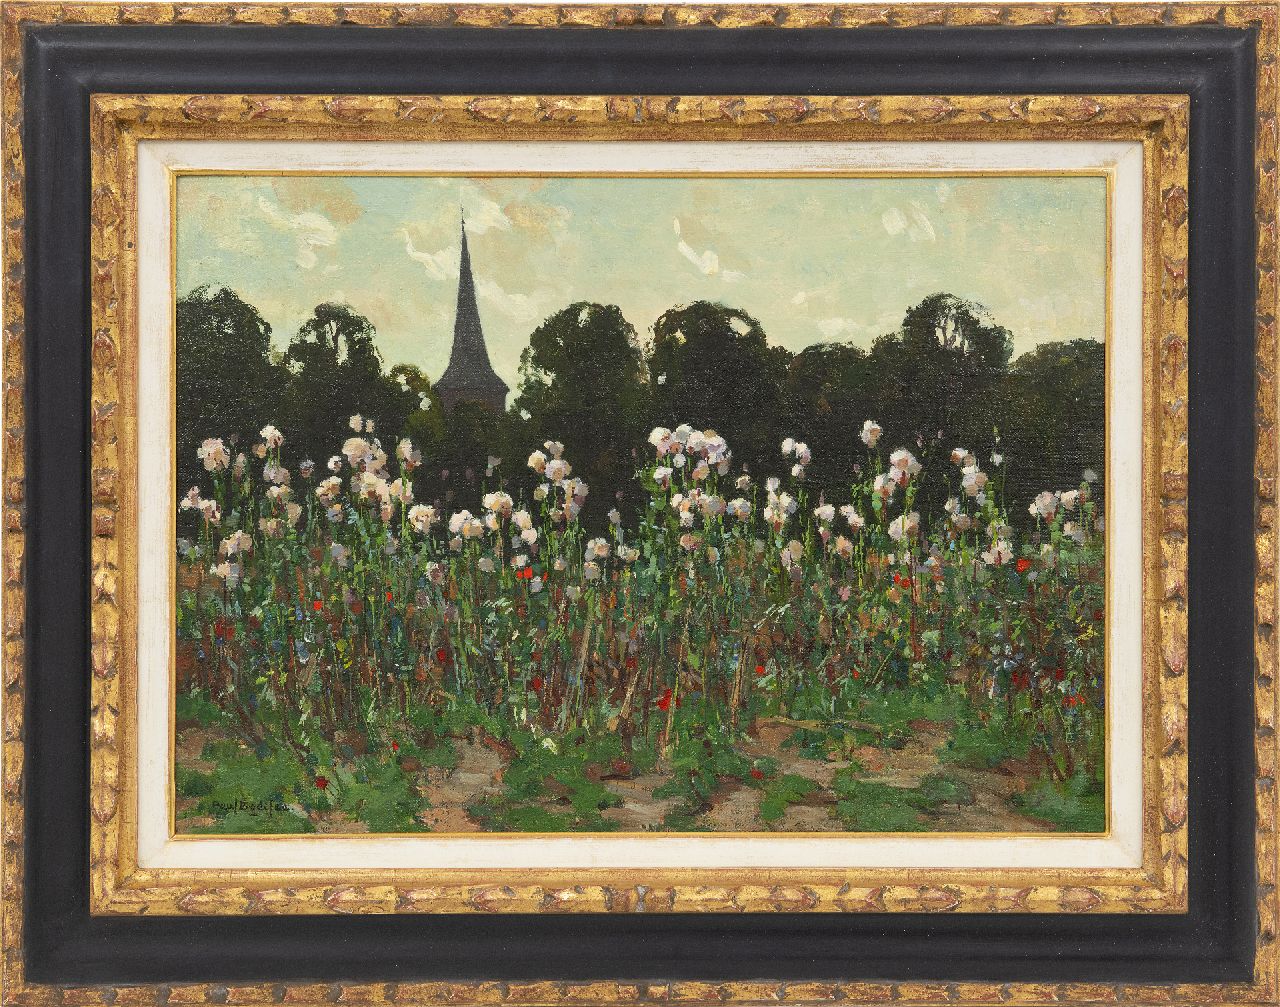 Bodifée J.P.P.  | Johannes Petrus Paulus 'Paul' Bodifée | Paintings offered for sale | A field of faded thistles near a church, oil on canvas laid down on board 33.1 x 46.5 cm, signed l.l.